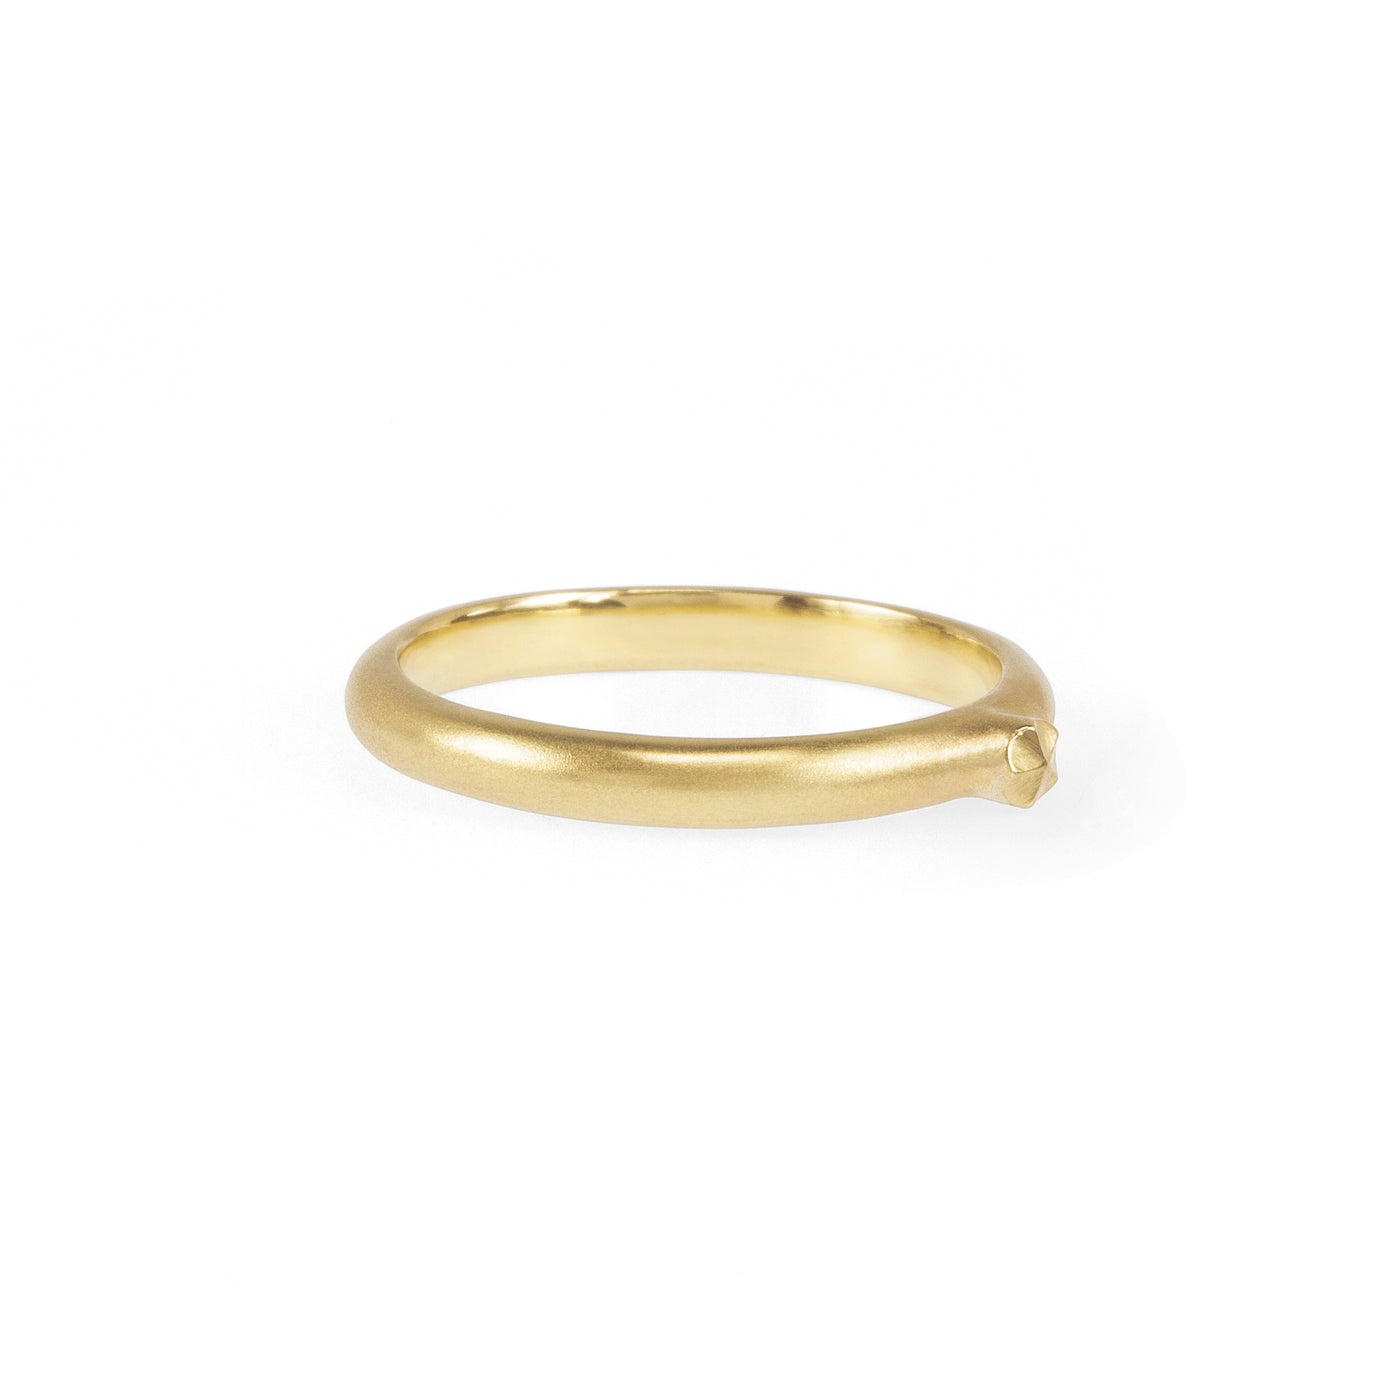 Eco-friendly gold ring. This sustainable Seed Ring is handmade in Cape Town in recycled gold from e-waste.